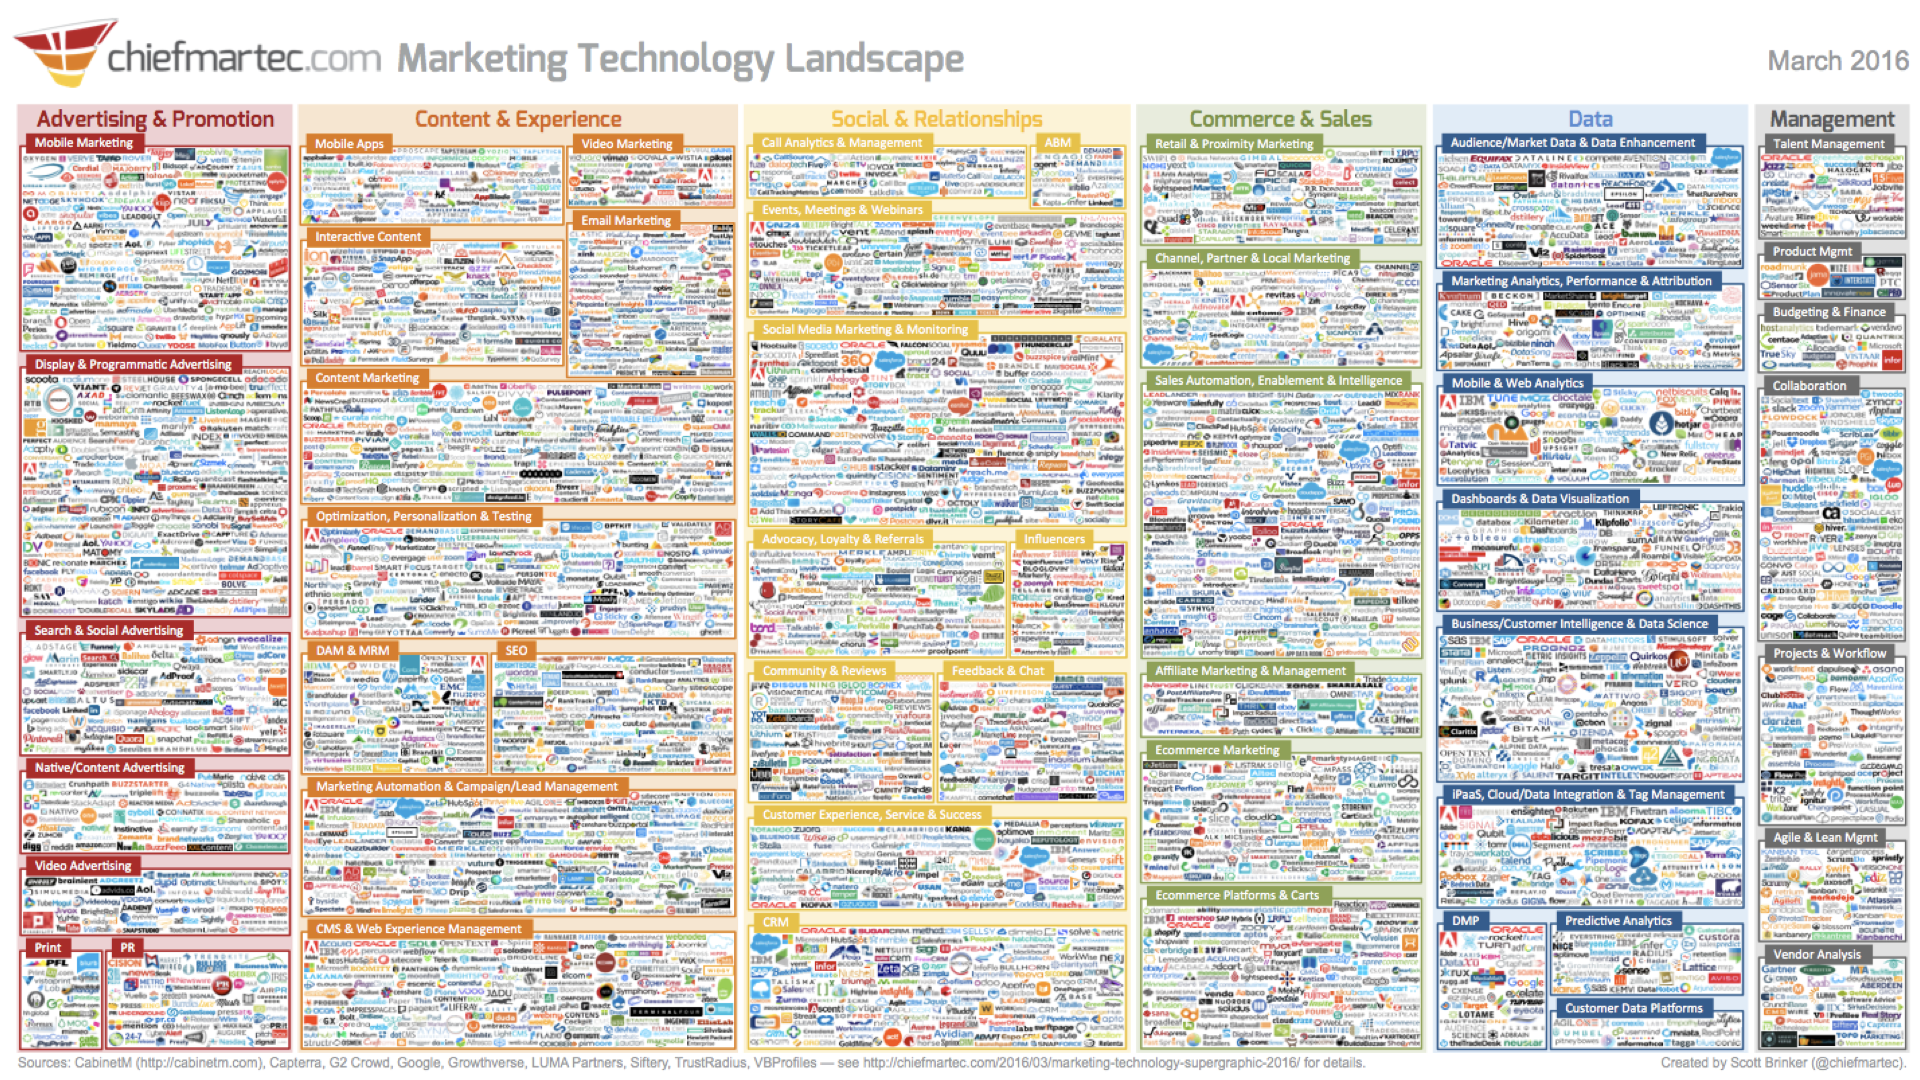 Intentionally overwhelming graphic representing the "Marketing Technology Landscape" with hundreds upon hundreds of apps and tools.